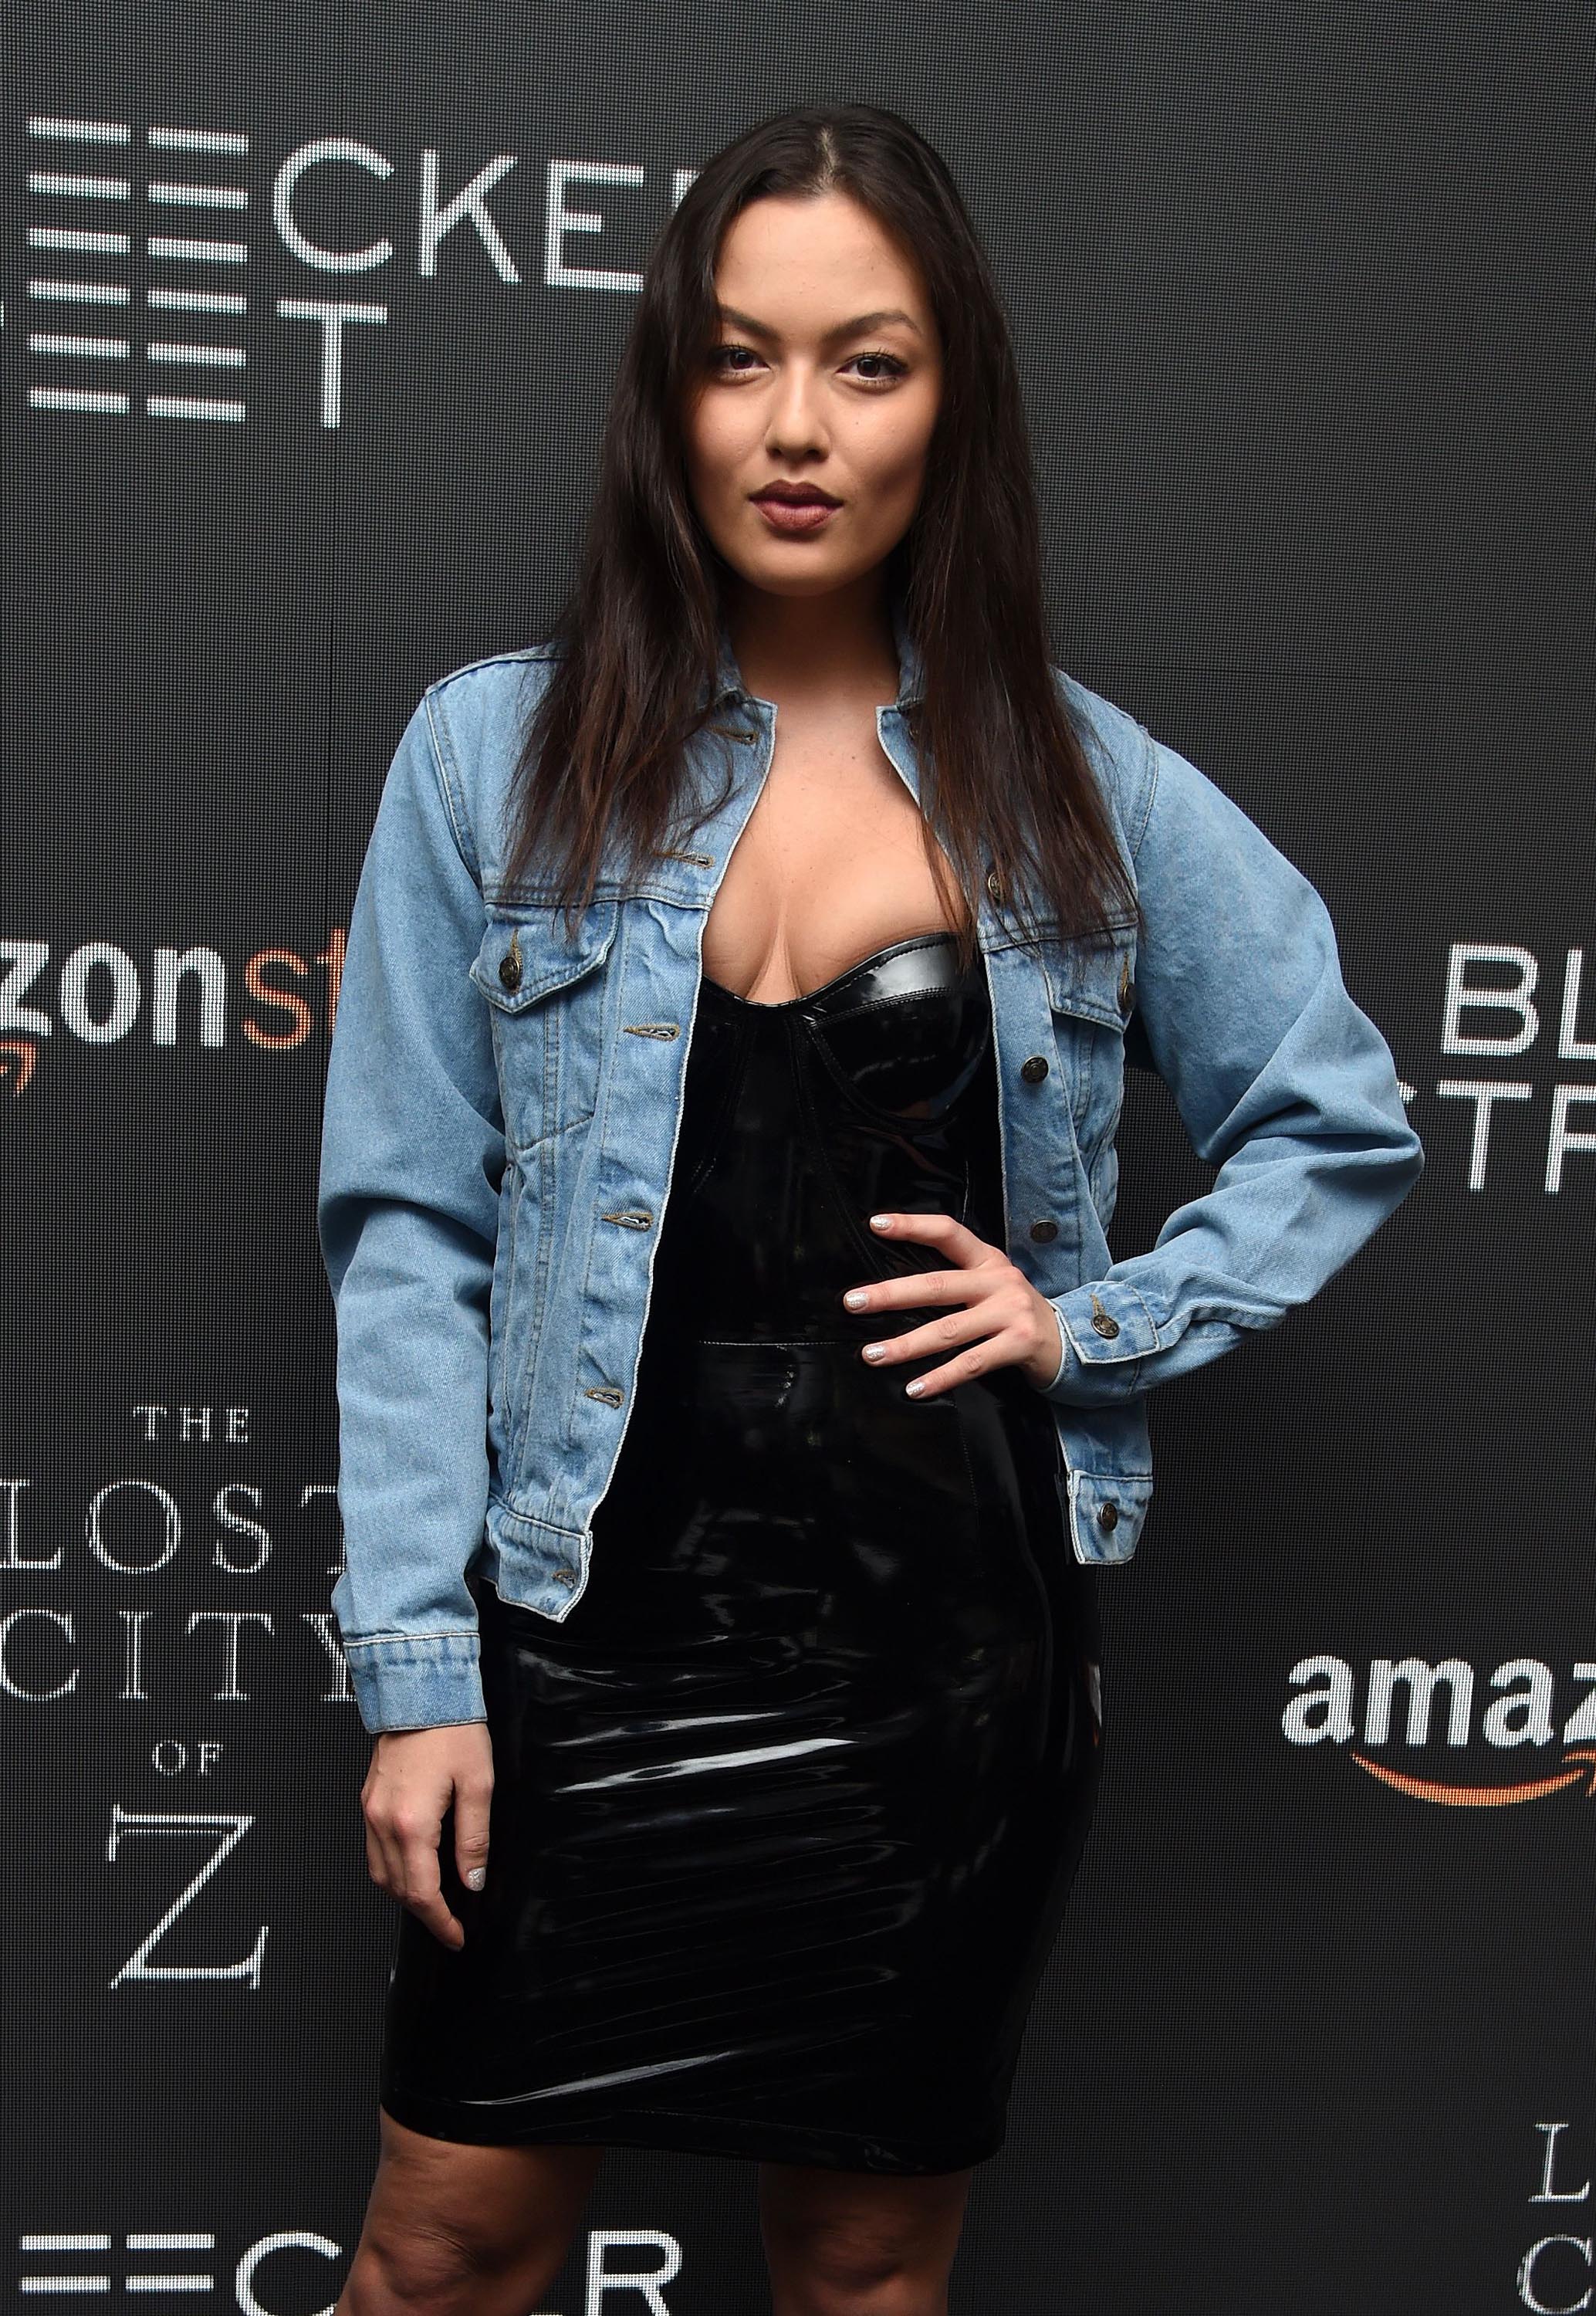 Mia Kang attends The Lost City of Z film screening